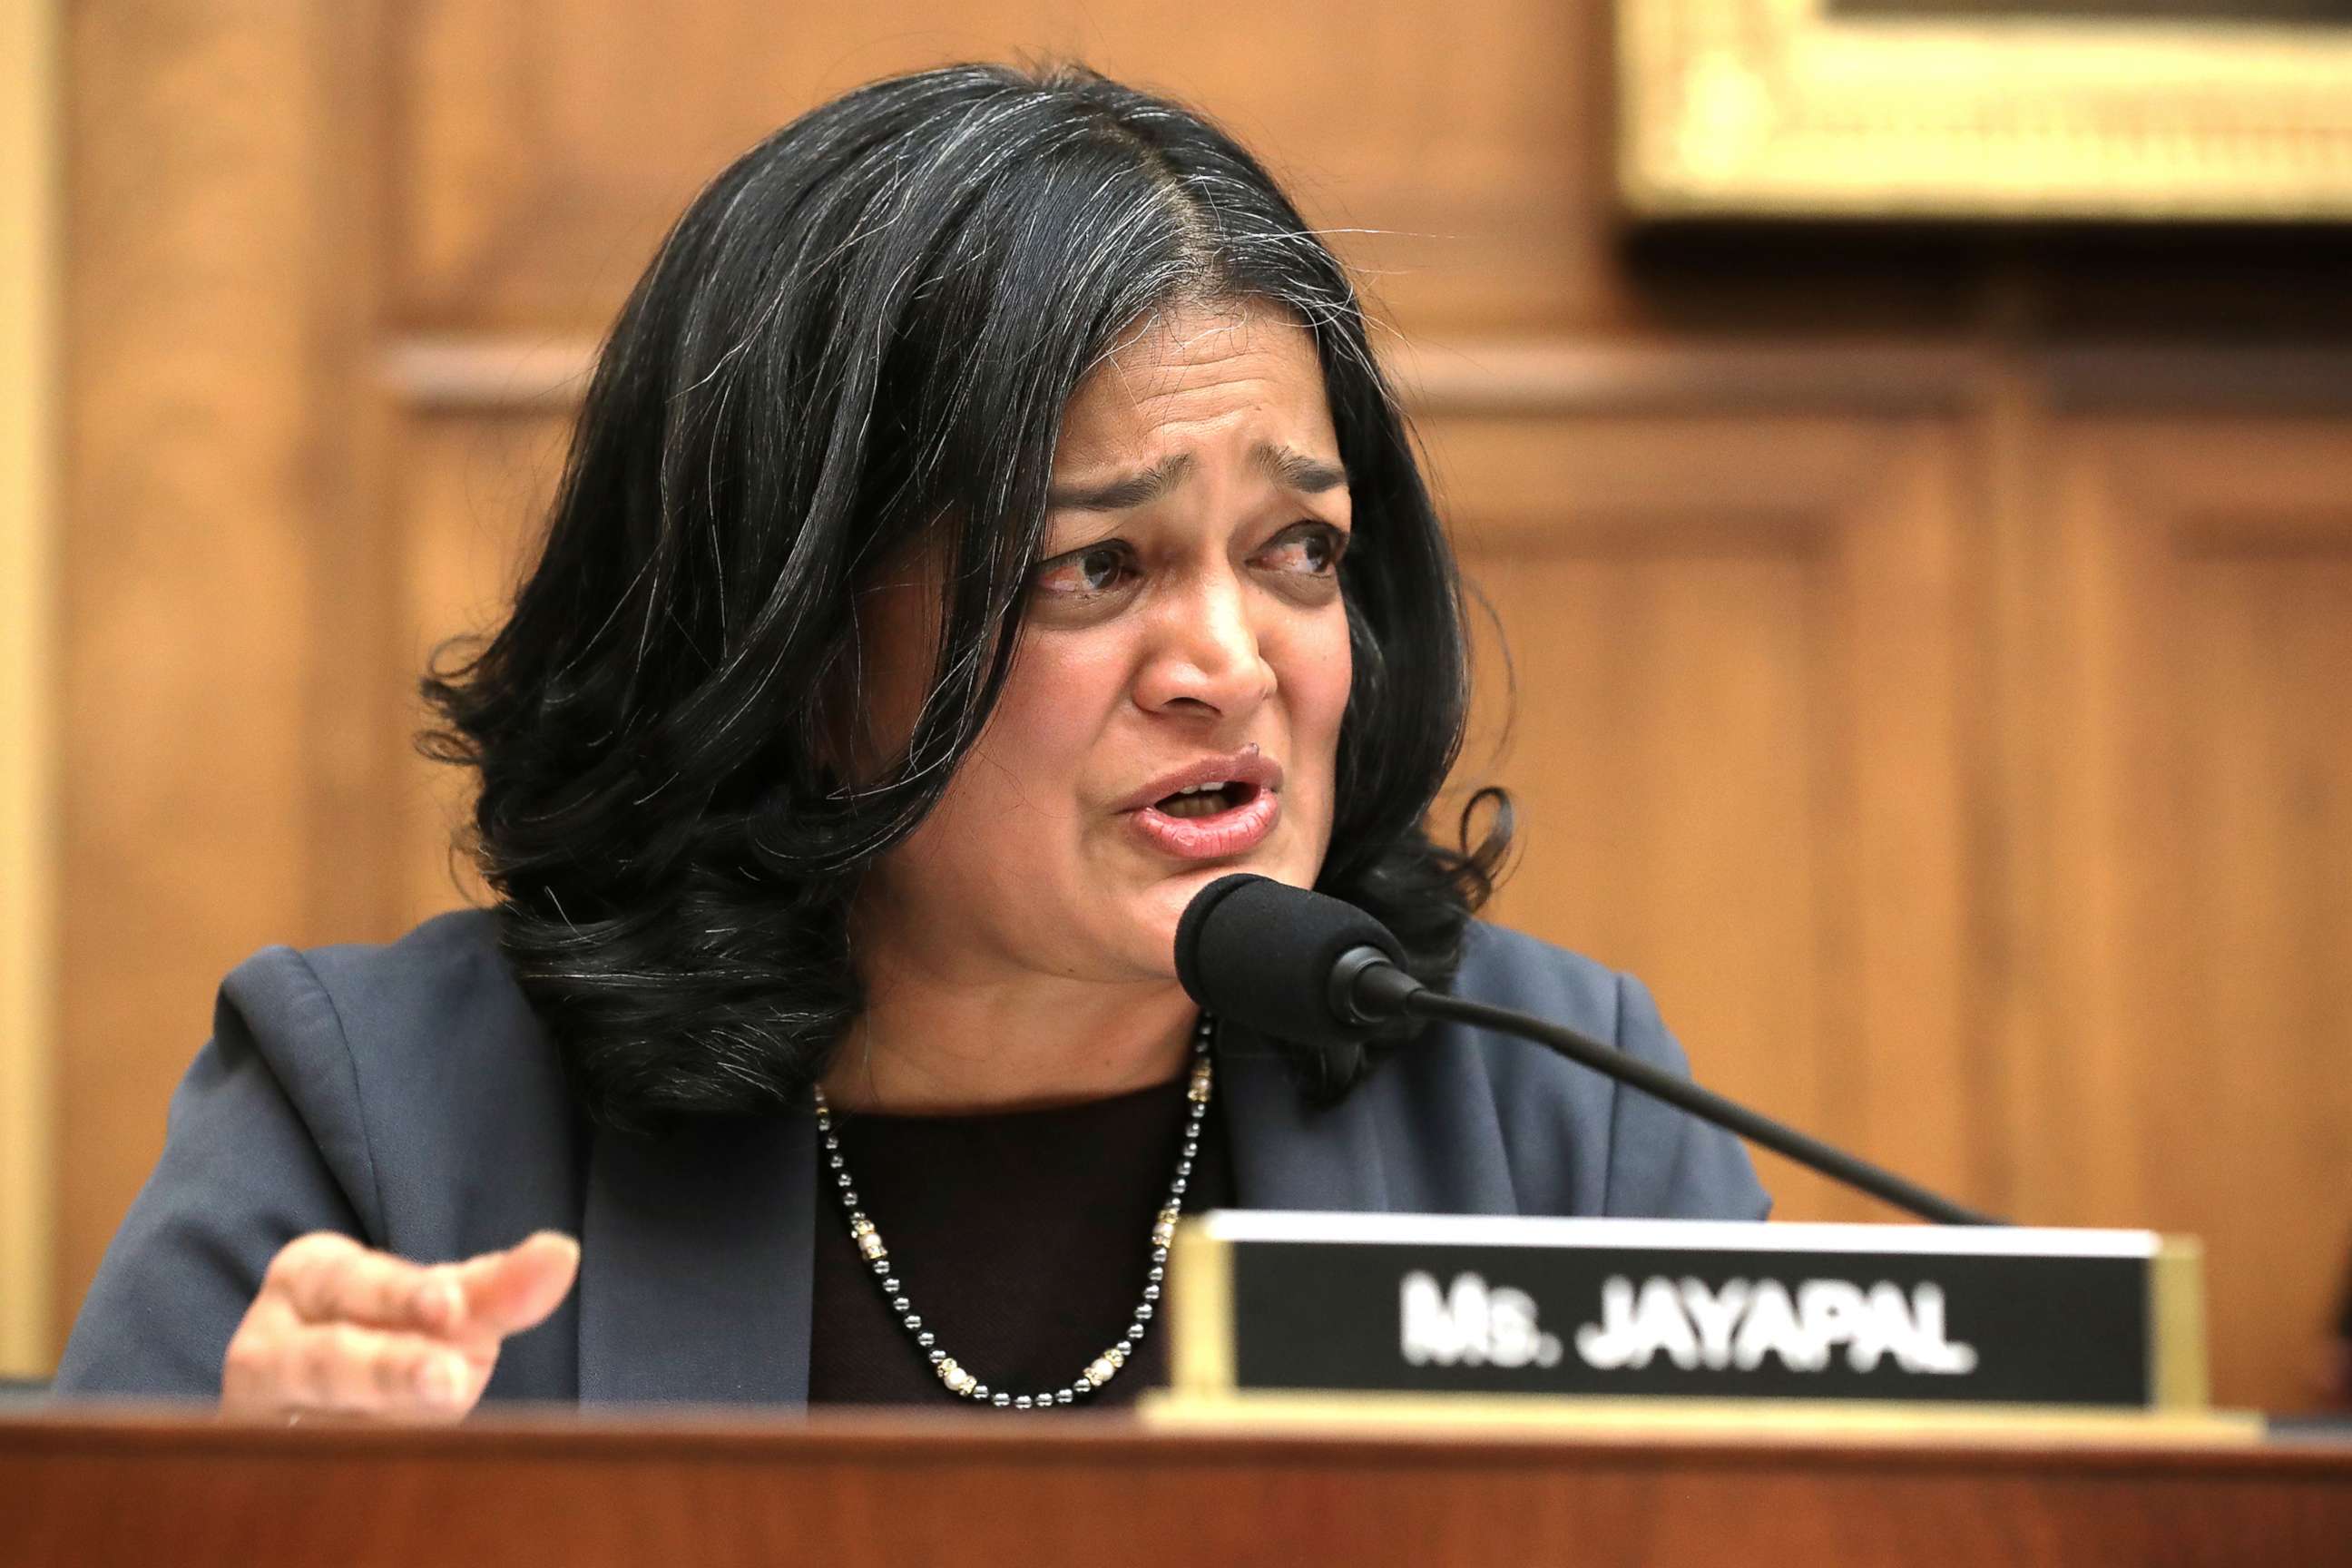 PHOTO: Rep. Pramila Jayapal questions witnesses during a hearing of the House Judiciary Committee's Antitrust, Commercial and Administrative Law Subcommittee on Capitol Hill on March 12, 2019, in Washington, D.C.